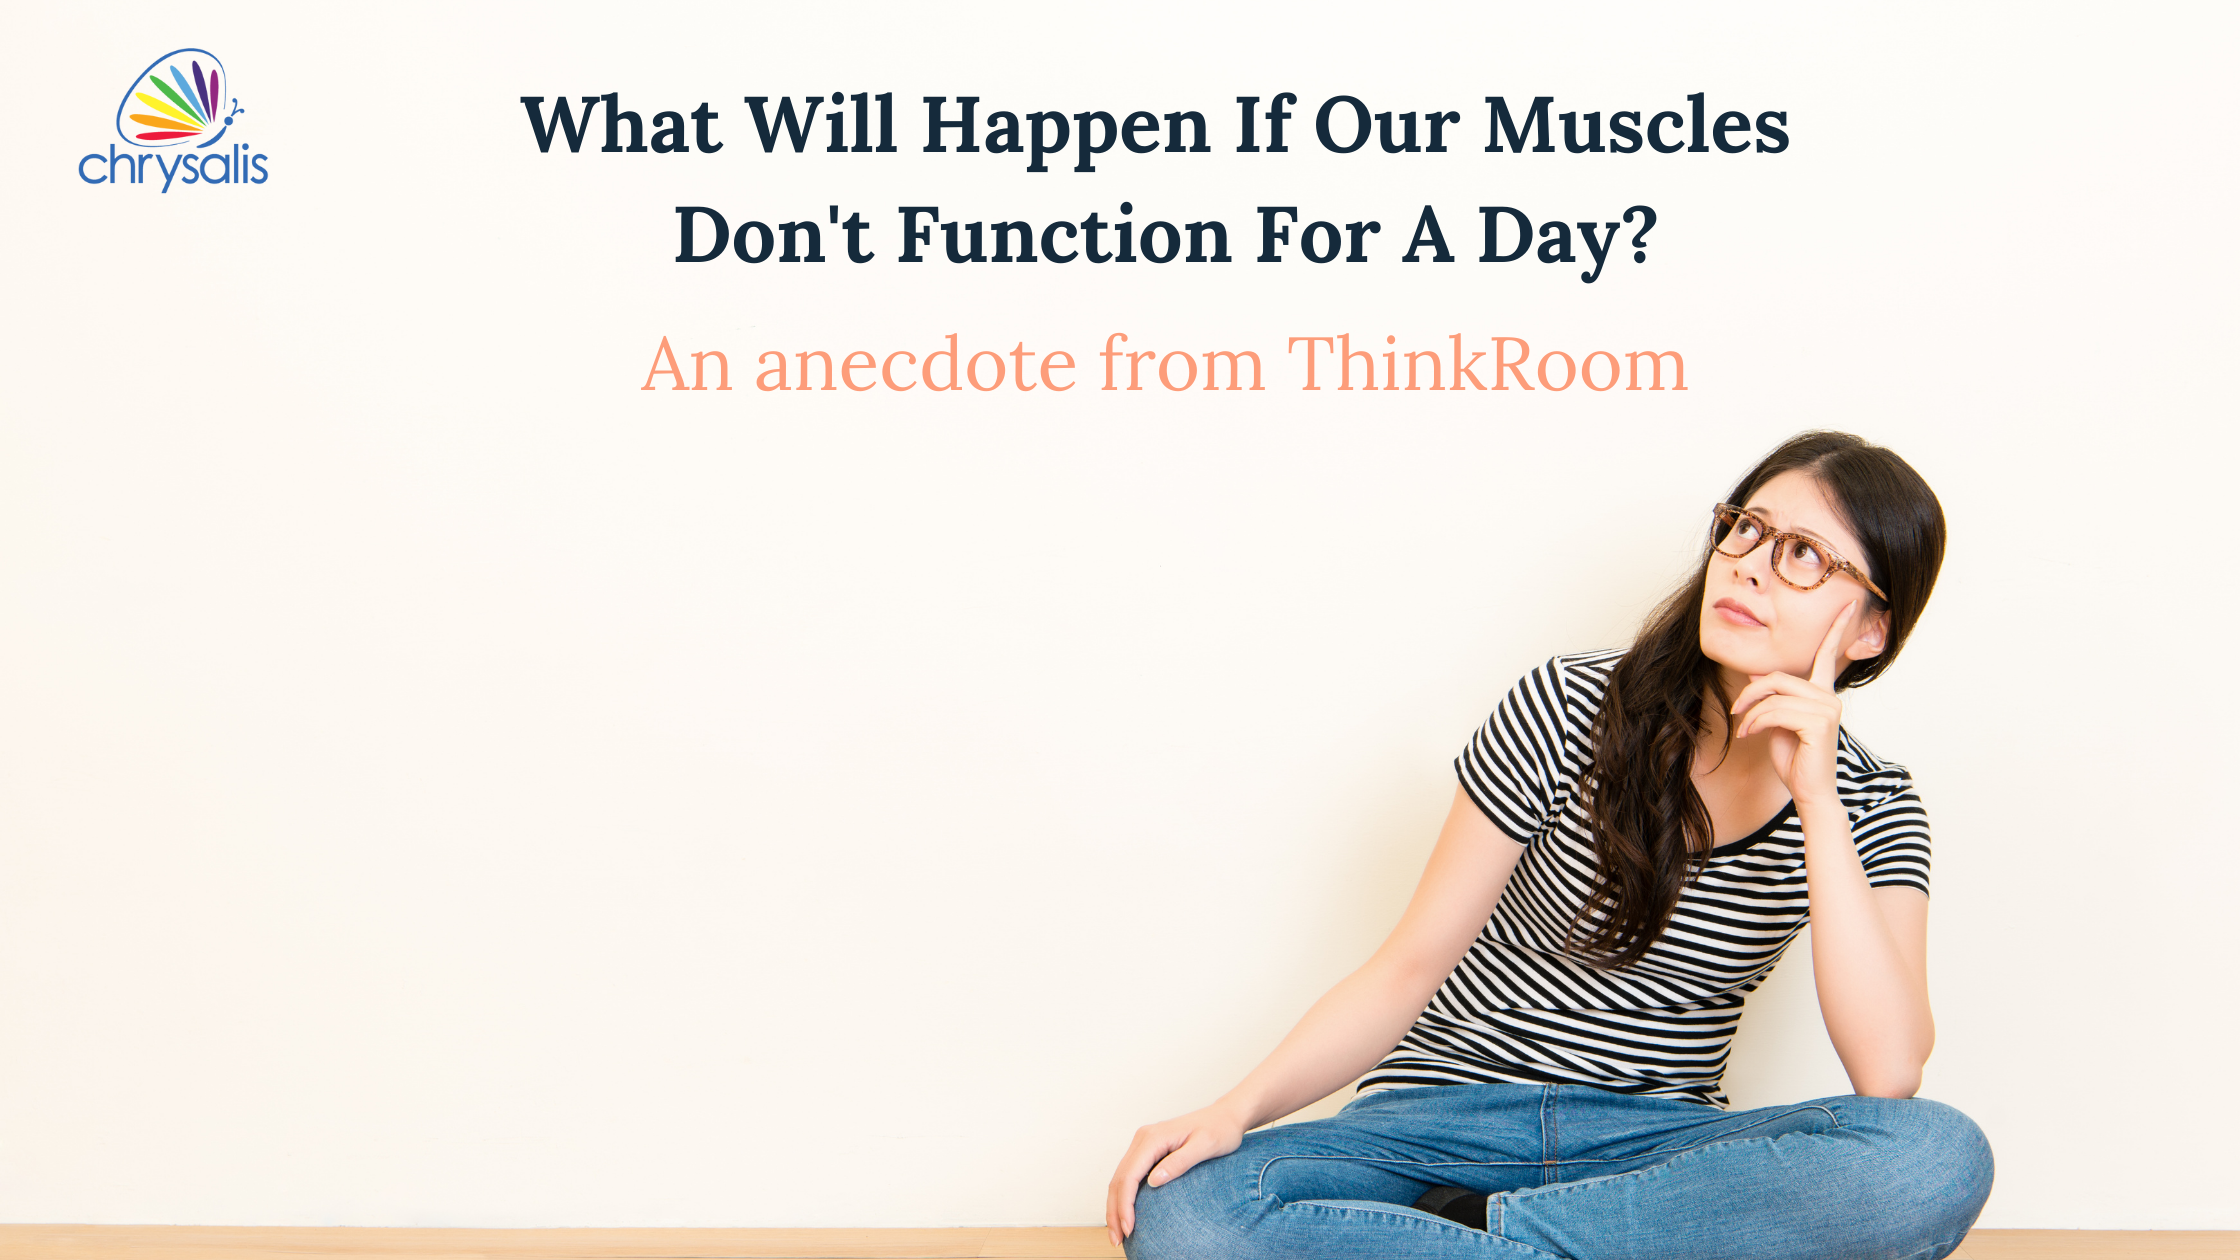 What Will Happen If Our Muscles Don't Function For A Day?